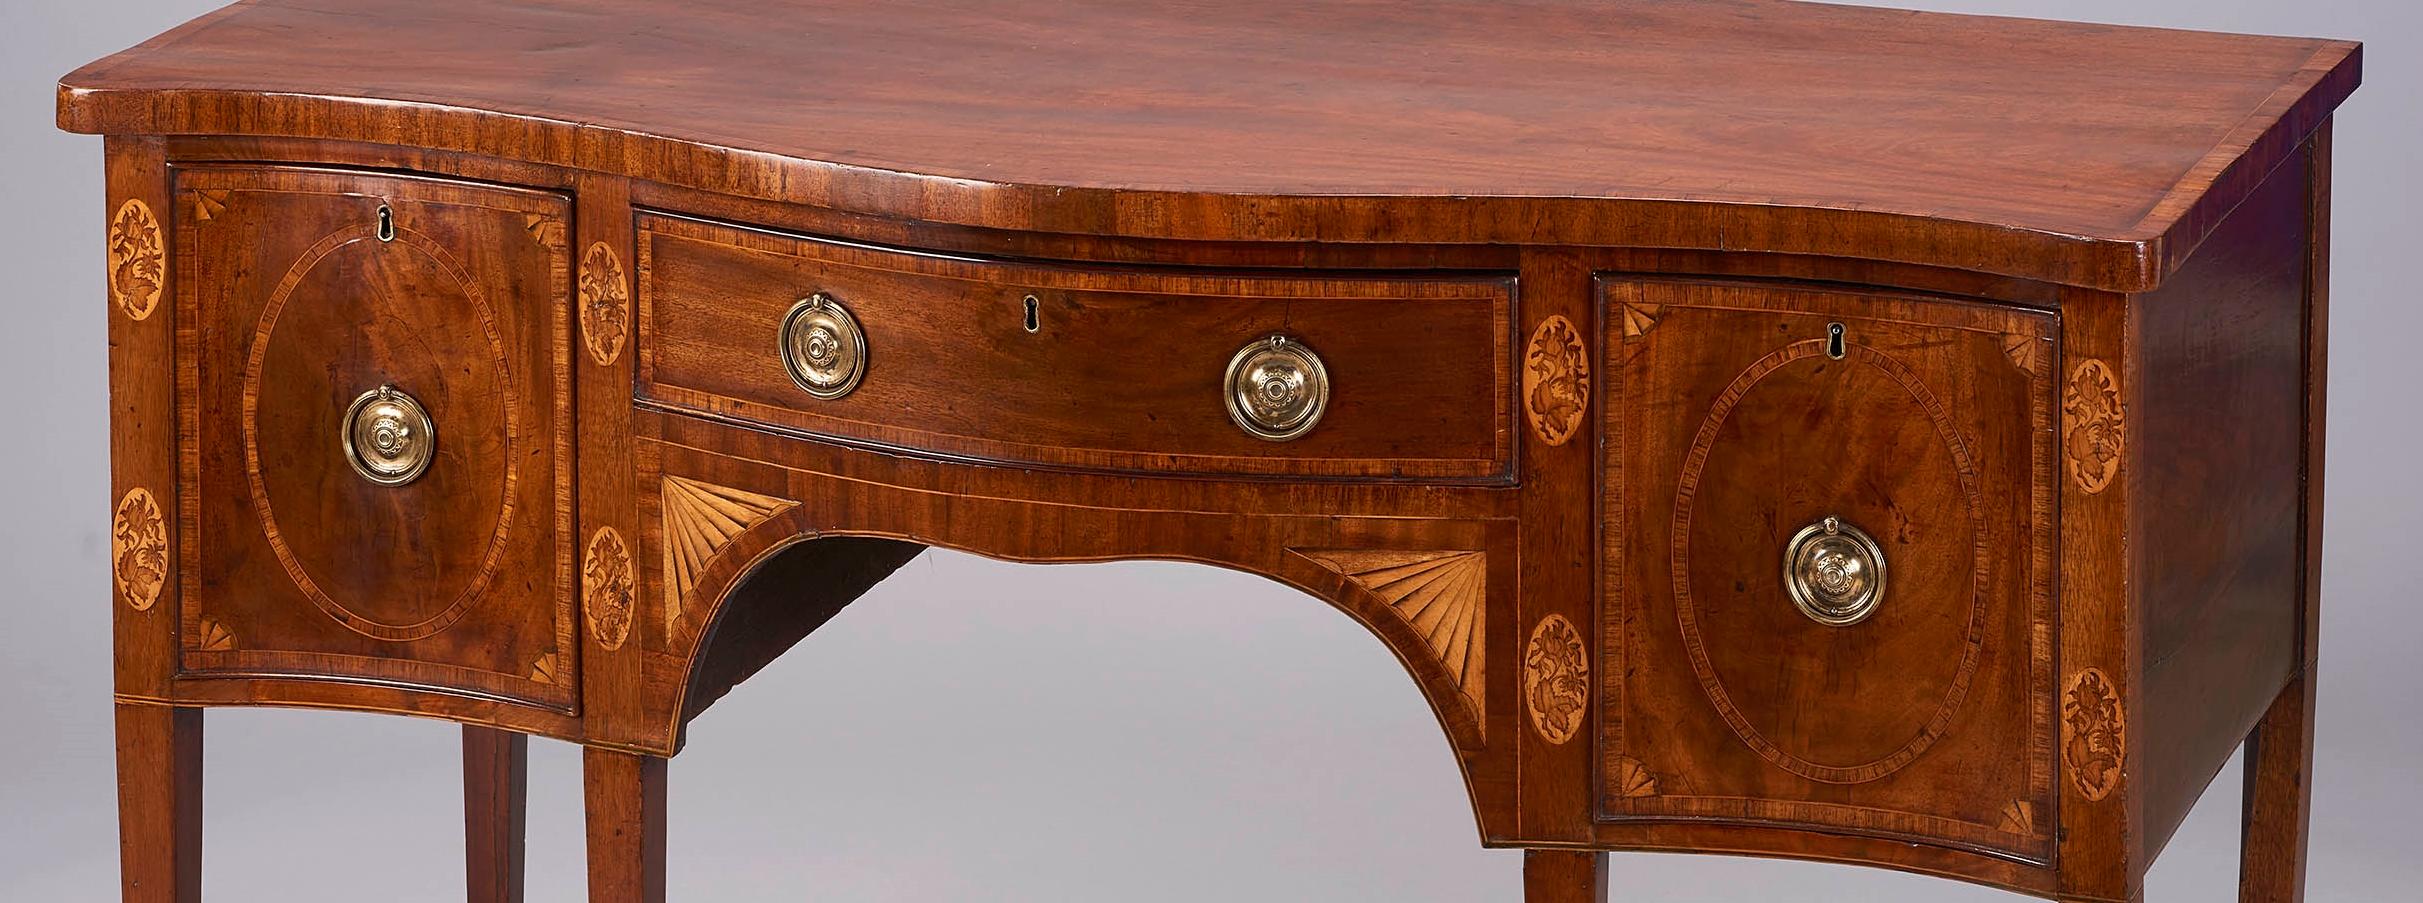 English Very Fine George III Period Mahogany Serpentine-Fronted Sideboard